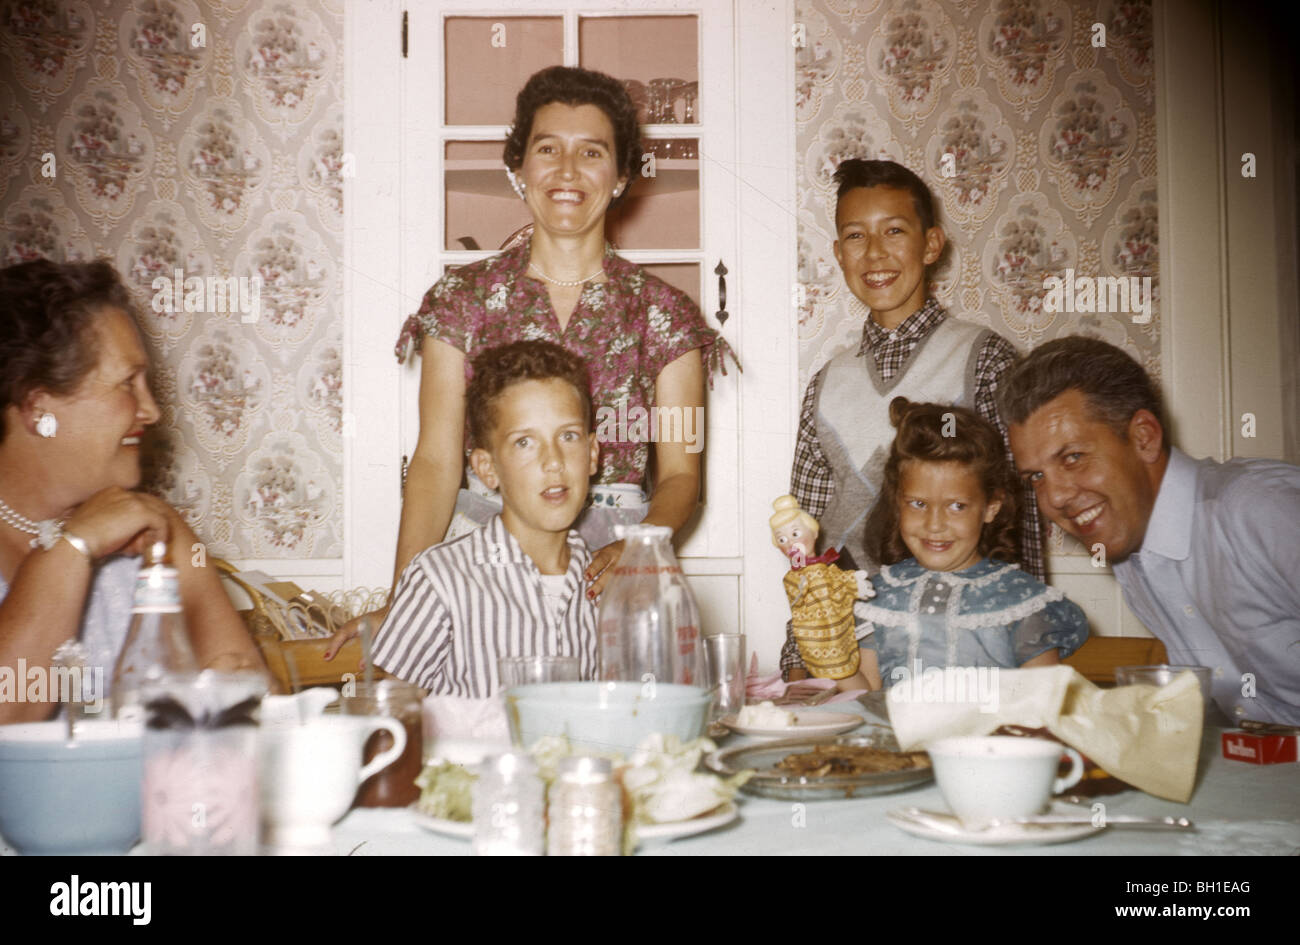 Family at the dinner table during the 1950s. vintage wallpaper horizontal posed portrait fashion 50s dining meal together smile Stock Photo